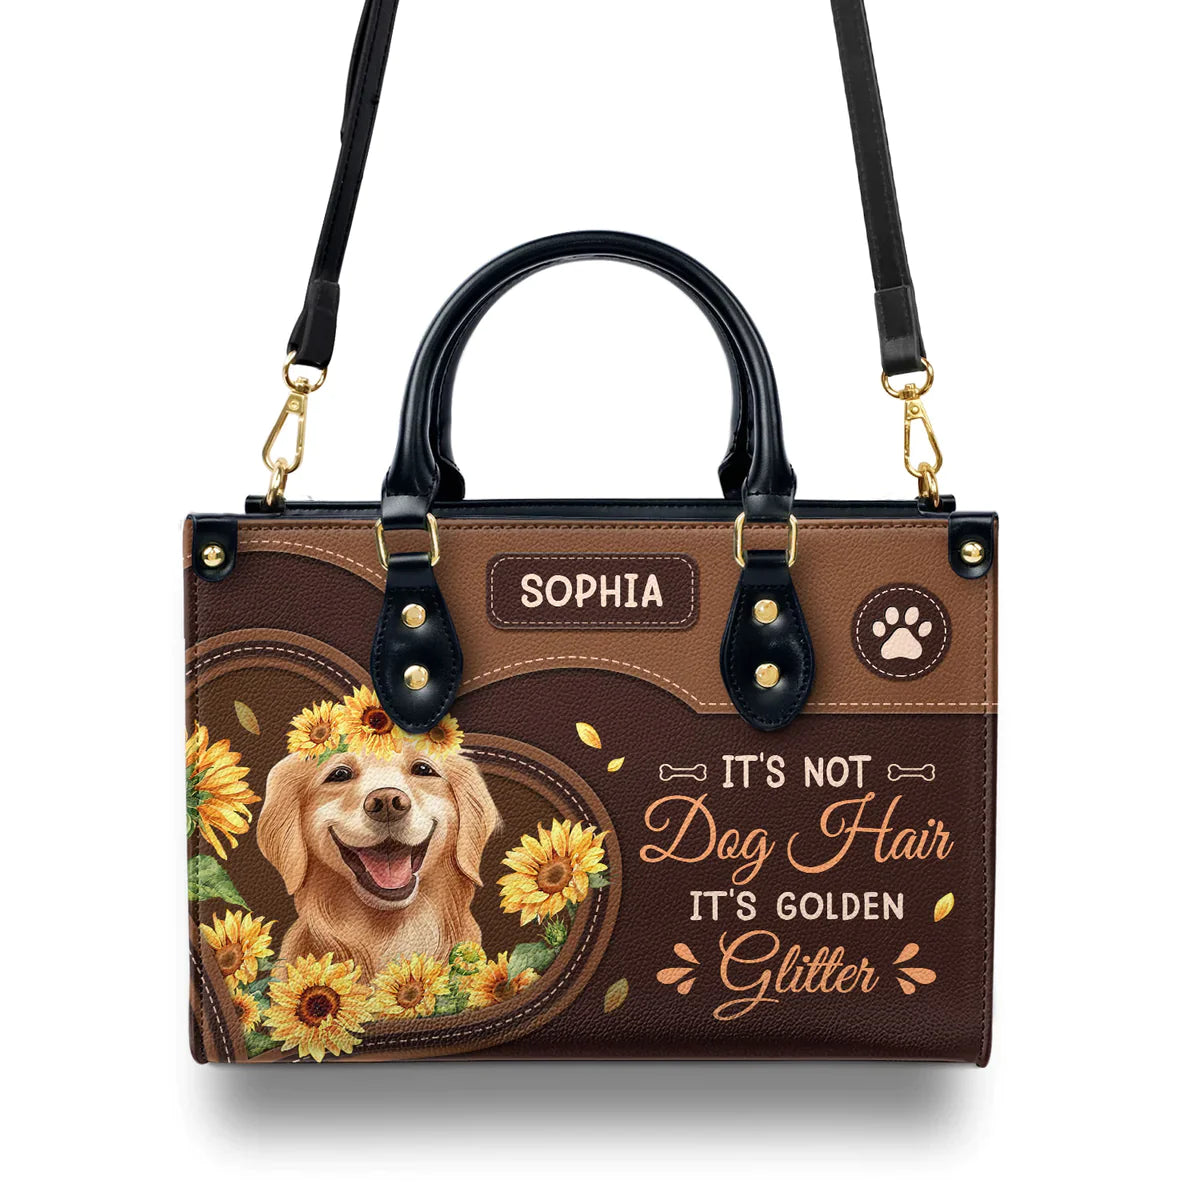 It Is Not Dog Hair It Is Golden Glitter Leather Bag